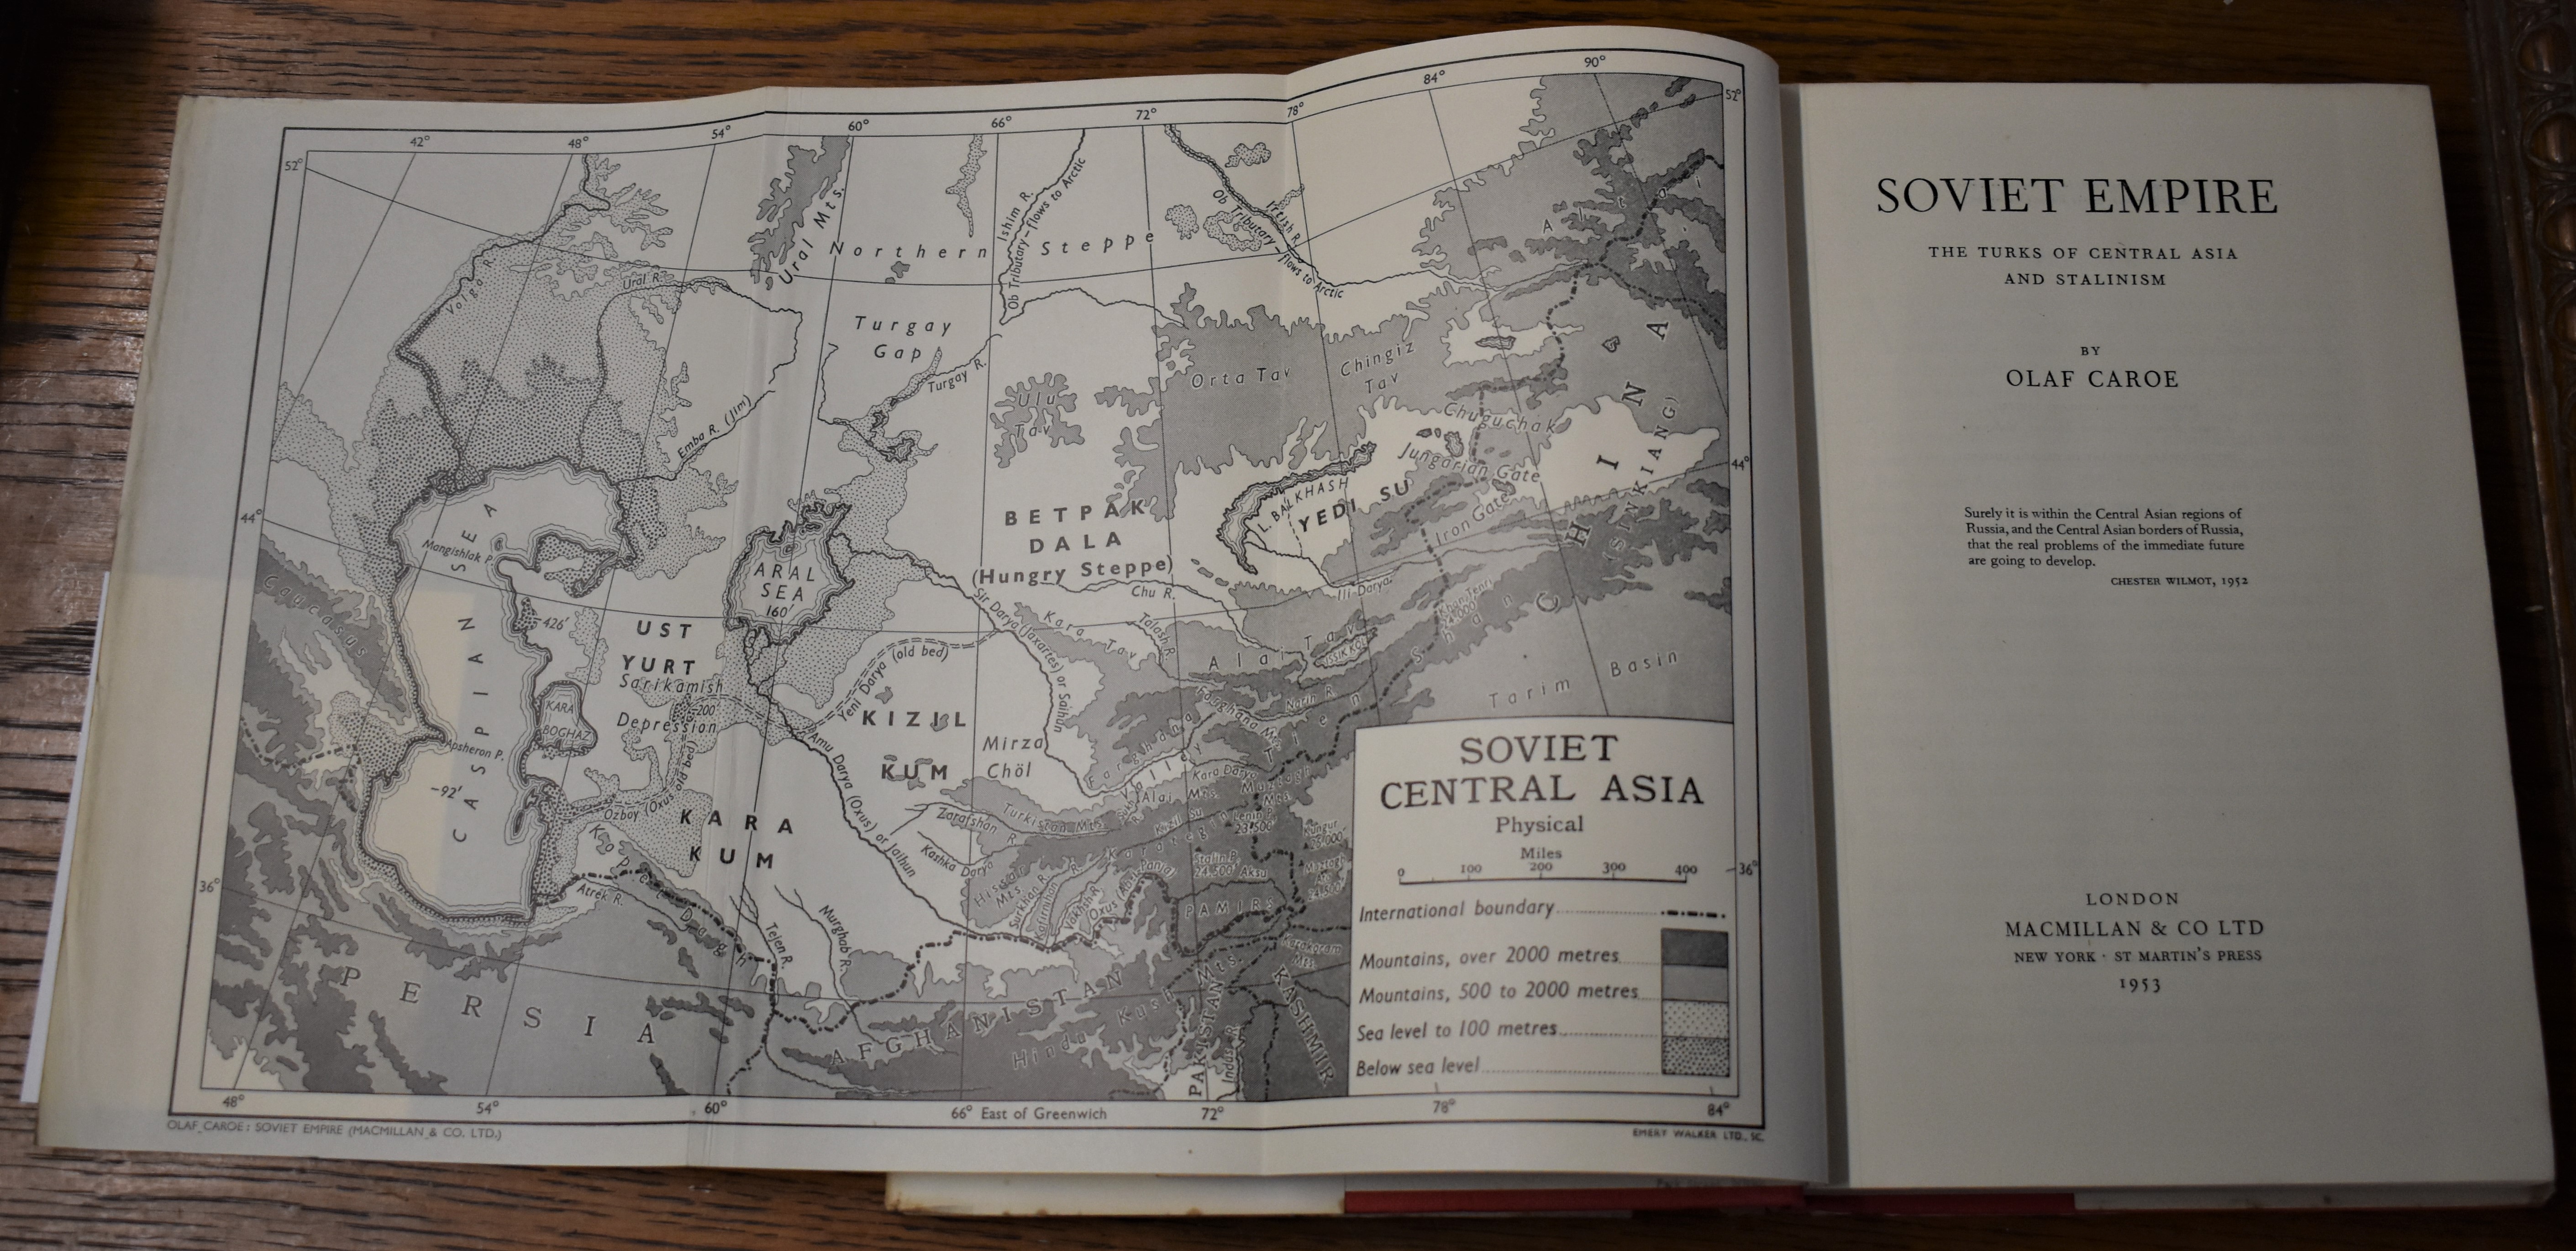 Soviet Empire, The Turks of Central Asia and Stalinism by Olaf Caroe, hardback with original dust - Image 3 of 4